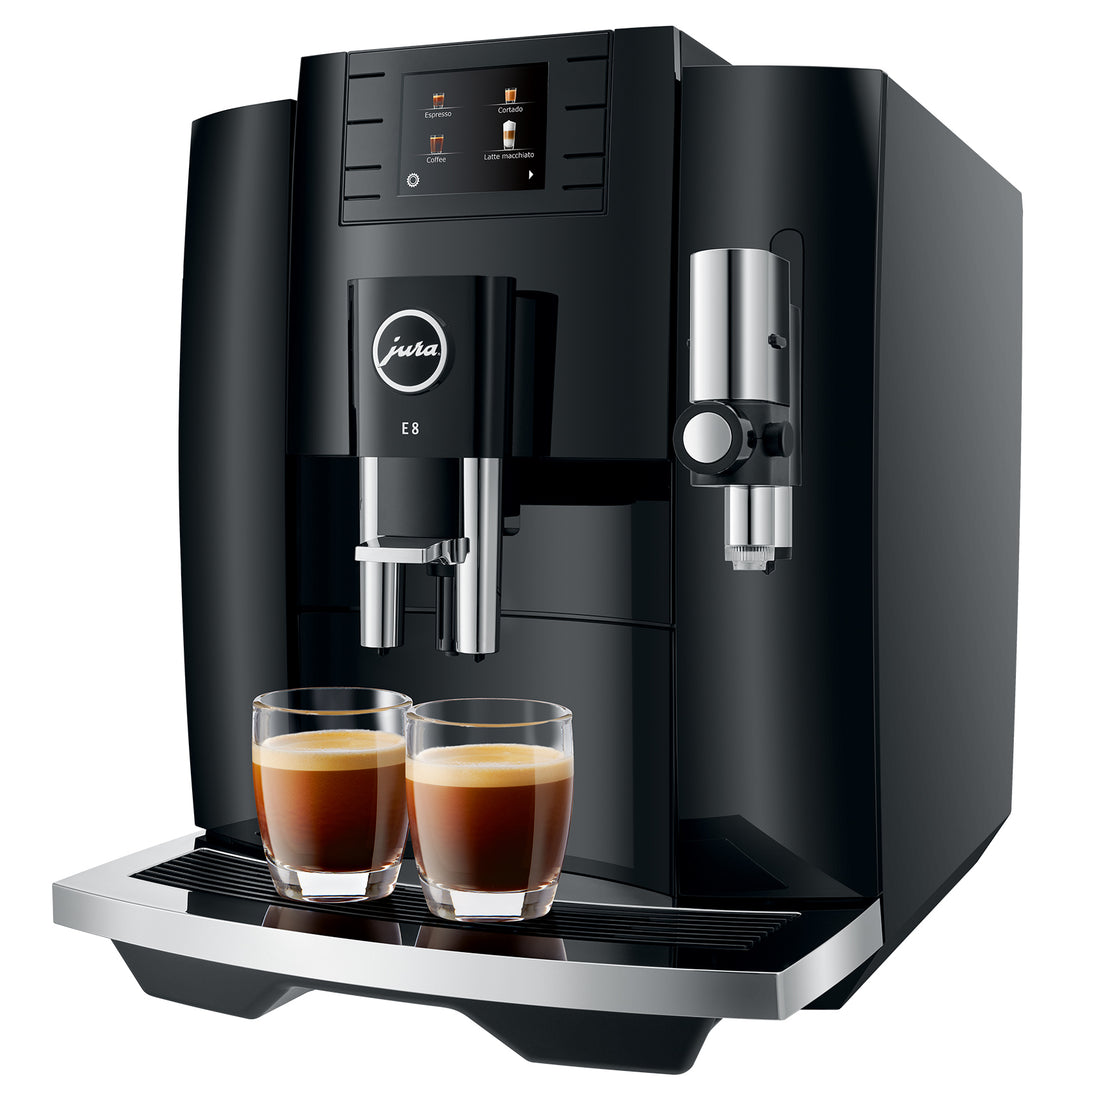 L'OR L'OR Barista Piano black - only €59.99 with